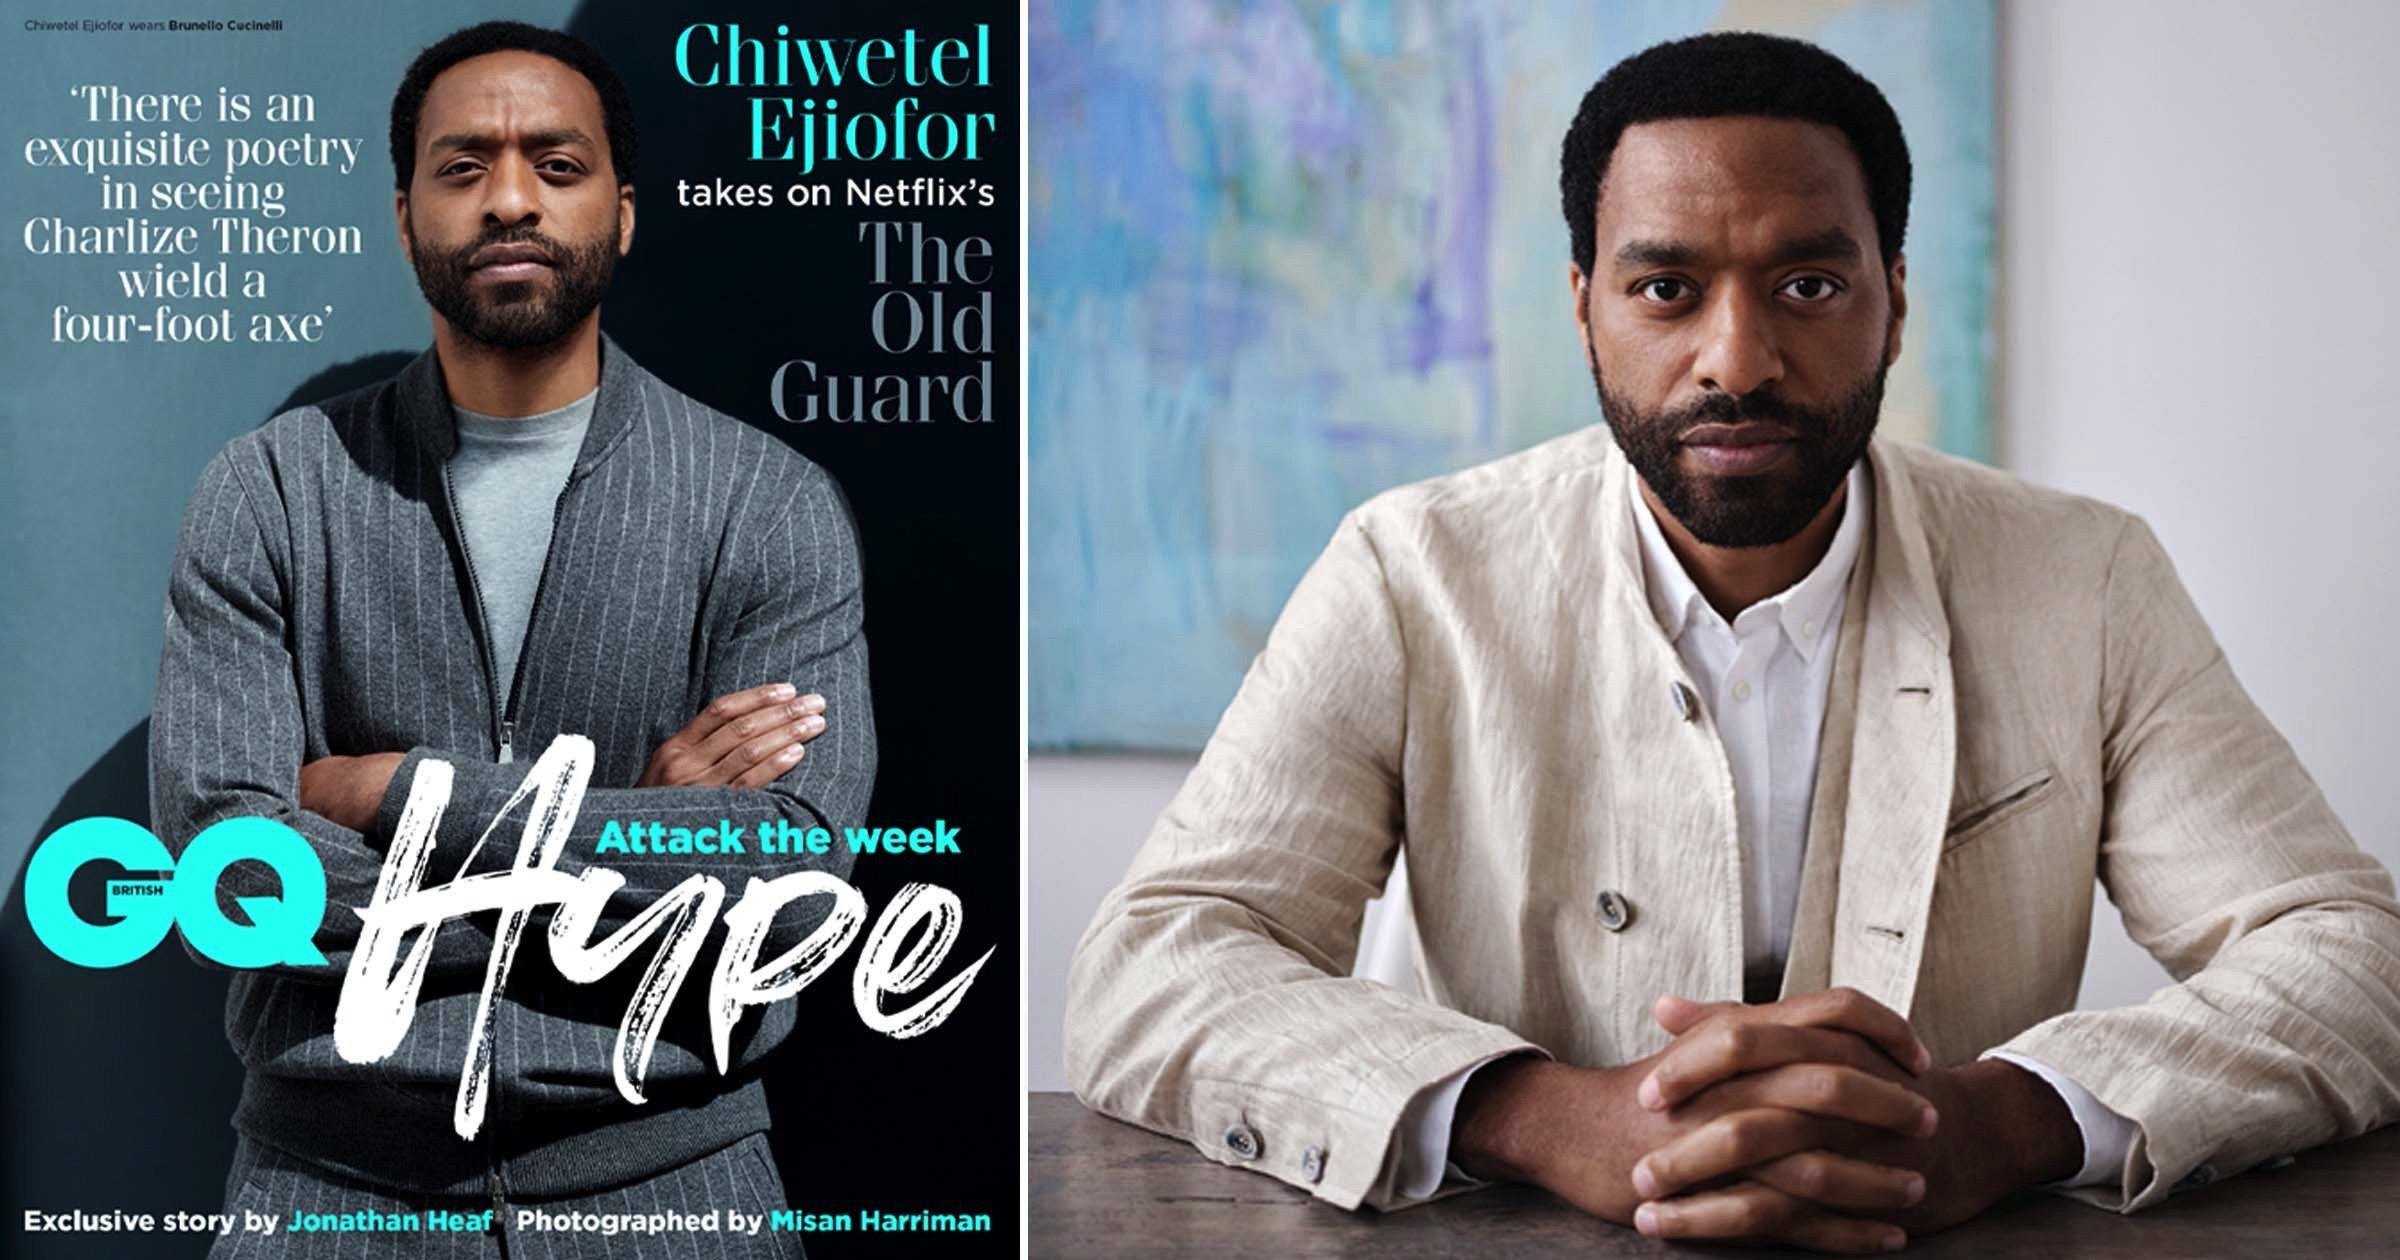 Chiwetel Ejiofor says cinemas can’t be ‘picky’ after coronavirus and franchise films will save the industry